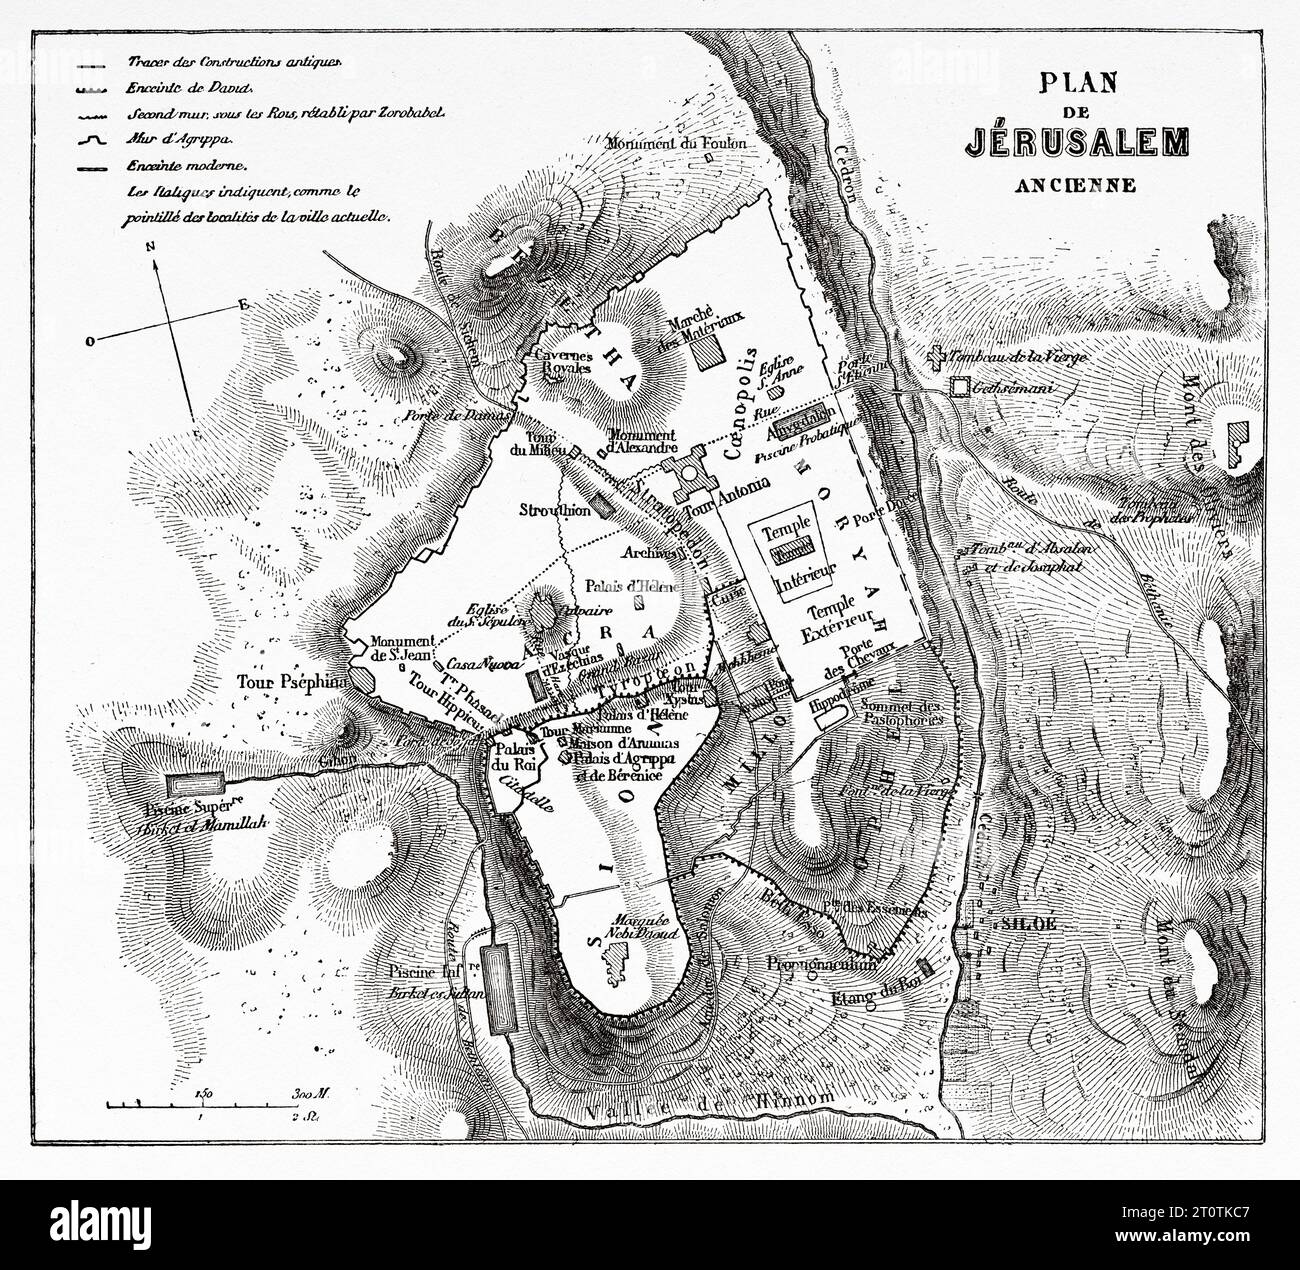 Jerusalem old city map. Travels in Palestine, 1856-1859. Old 19th century engraving from Le Tour du Monde 1860 Stock Photo